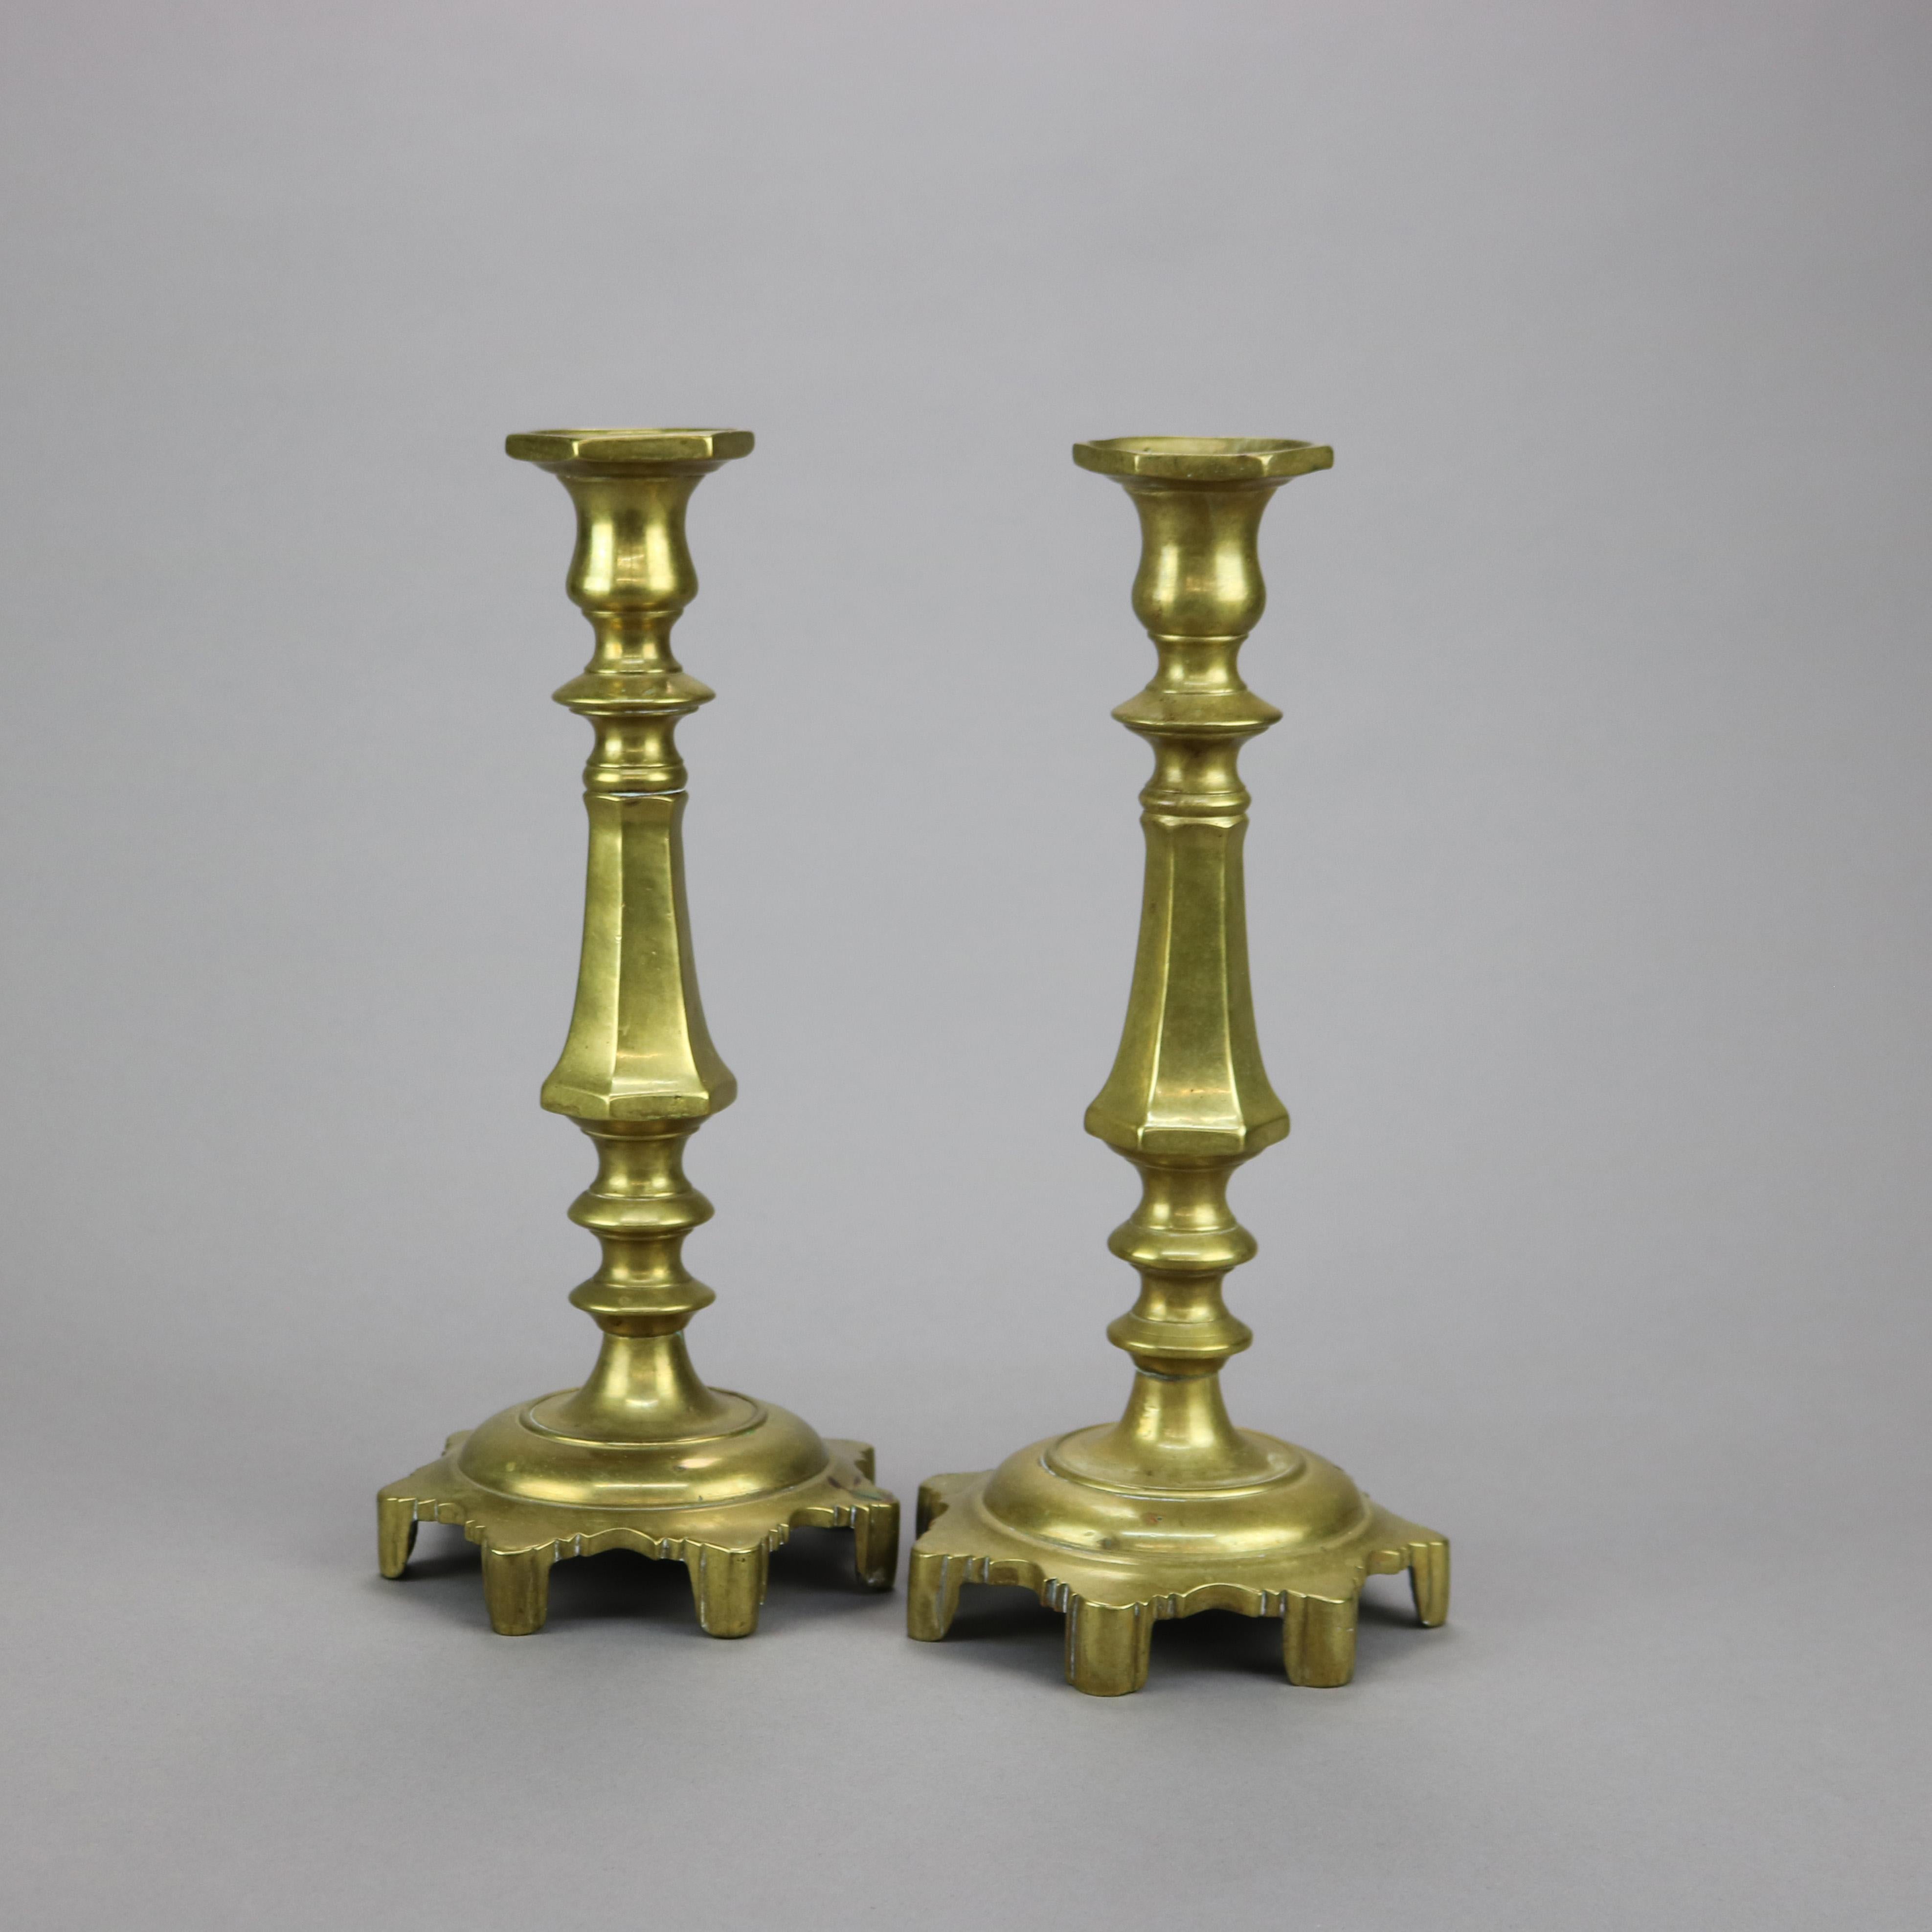 Antique Pair of Early American Brass Balustrade Footed Candlesticks 19th C In Good Condition For Sale In Big Flats, NY